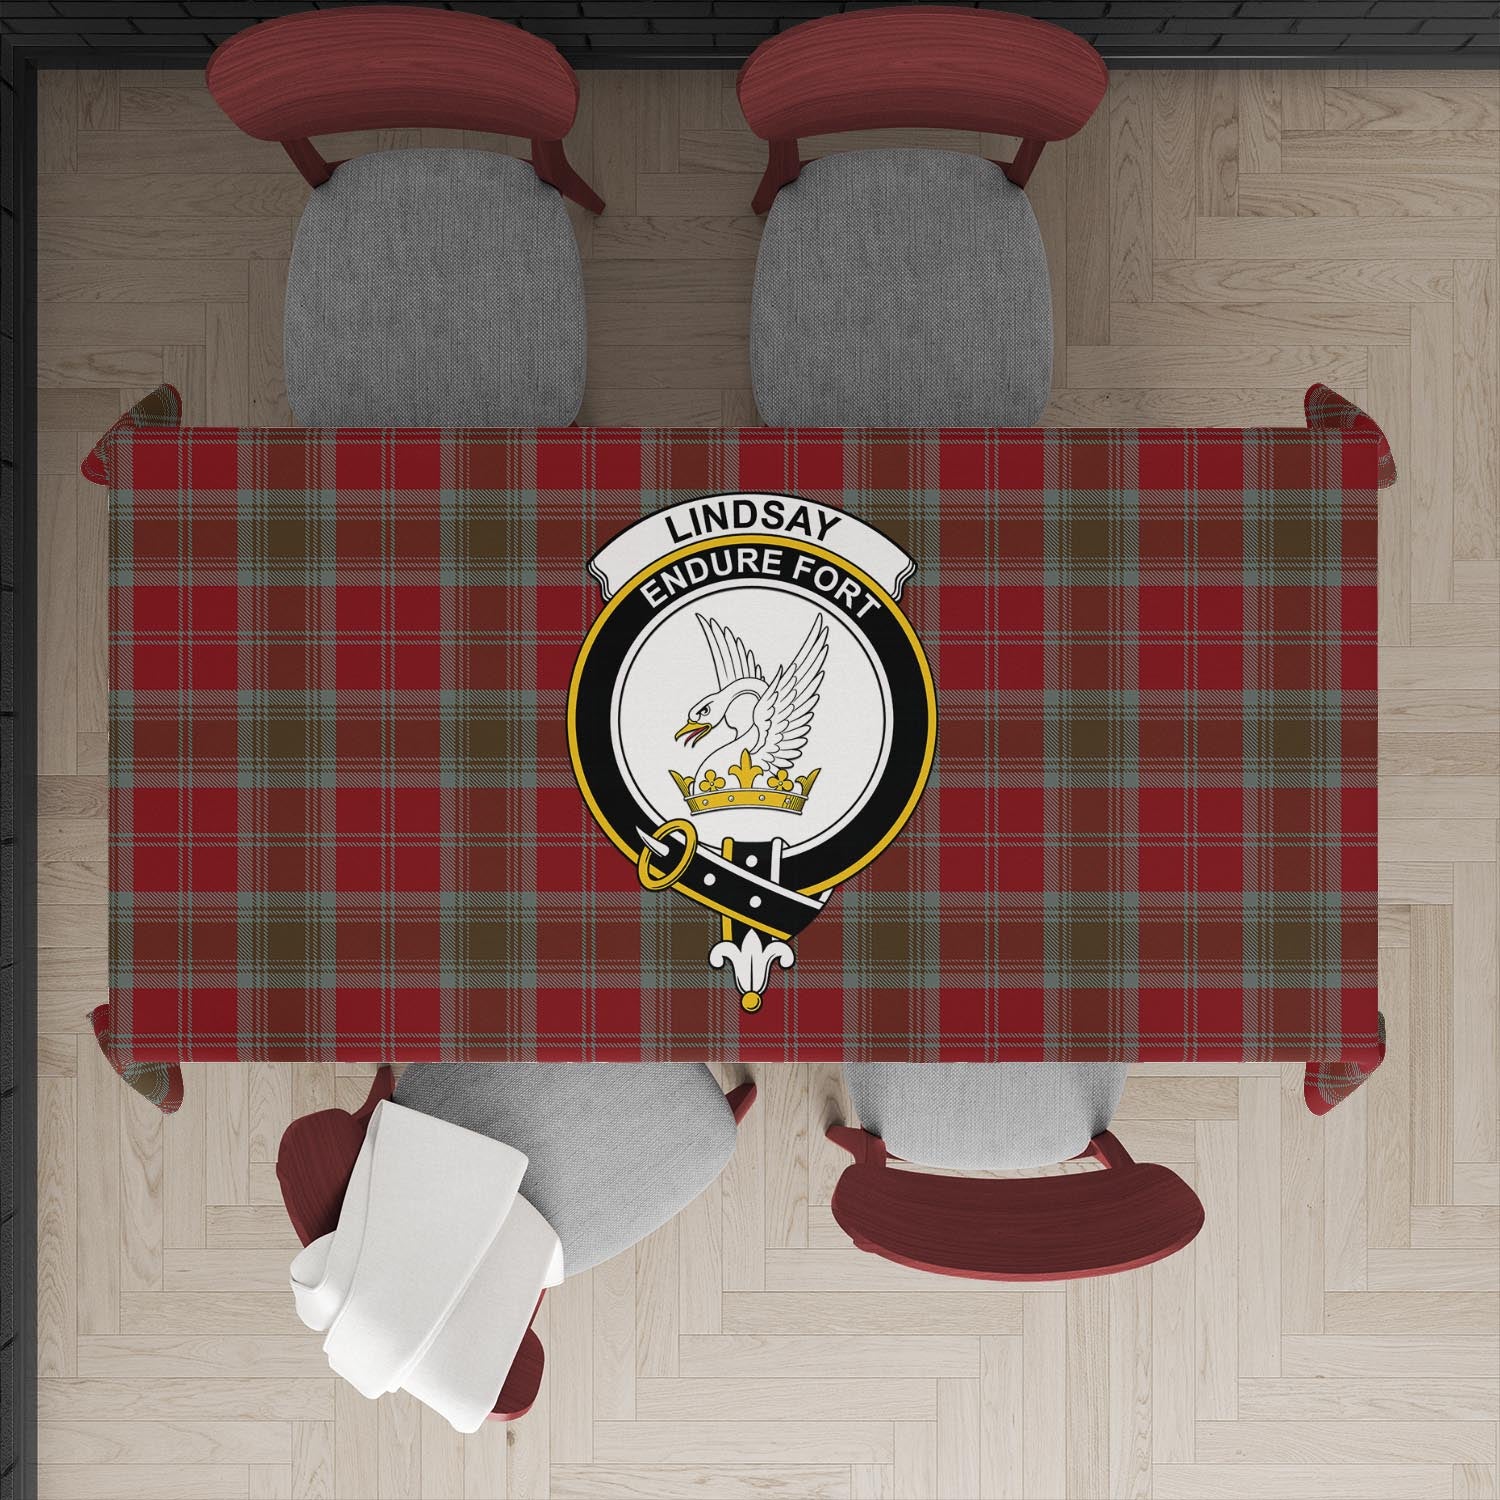 lindsay-weathered-tatan-tablecloth-with-family-crest